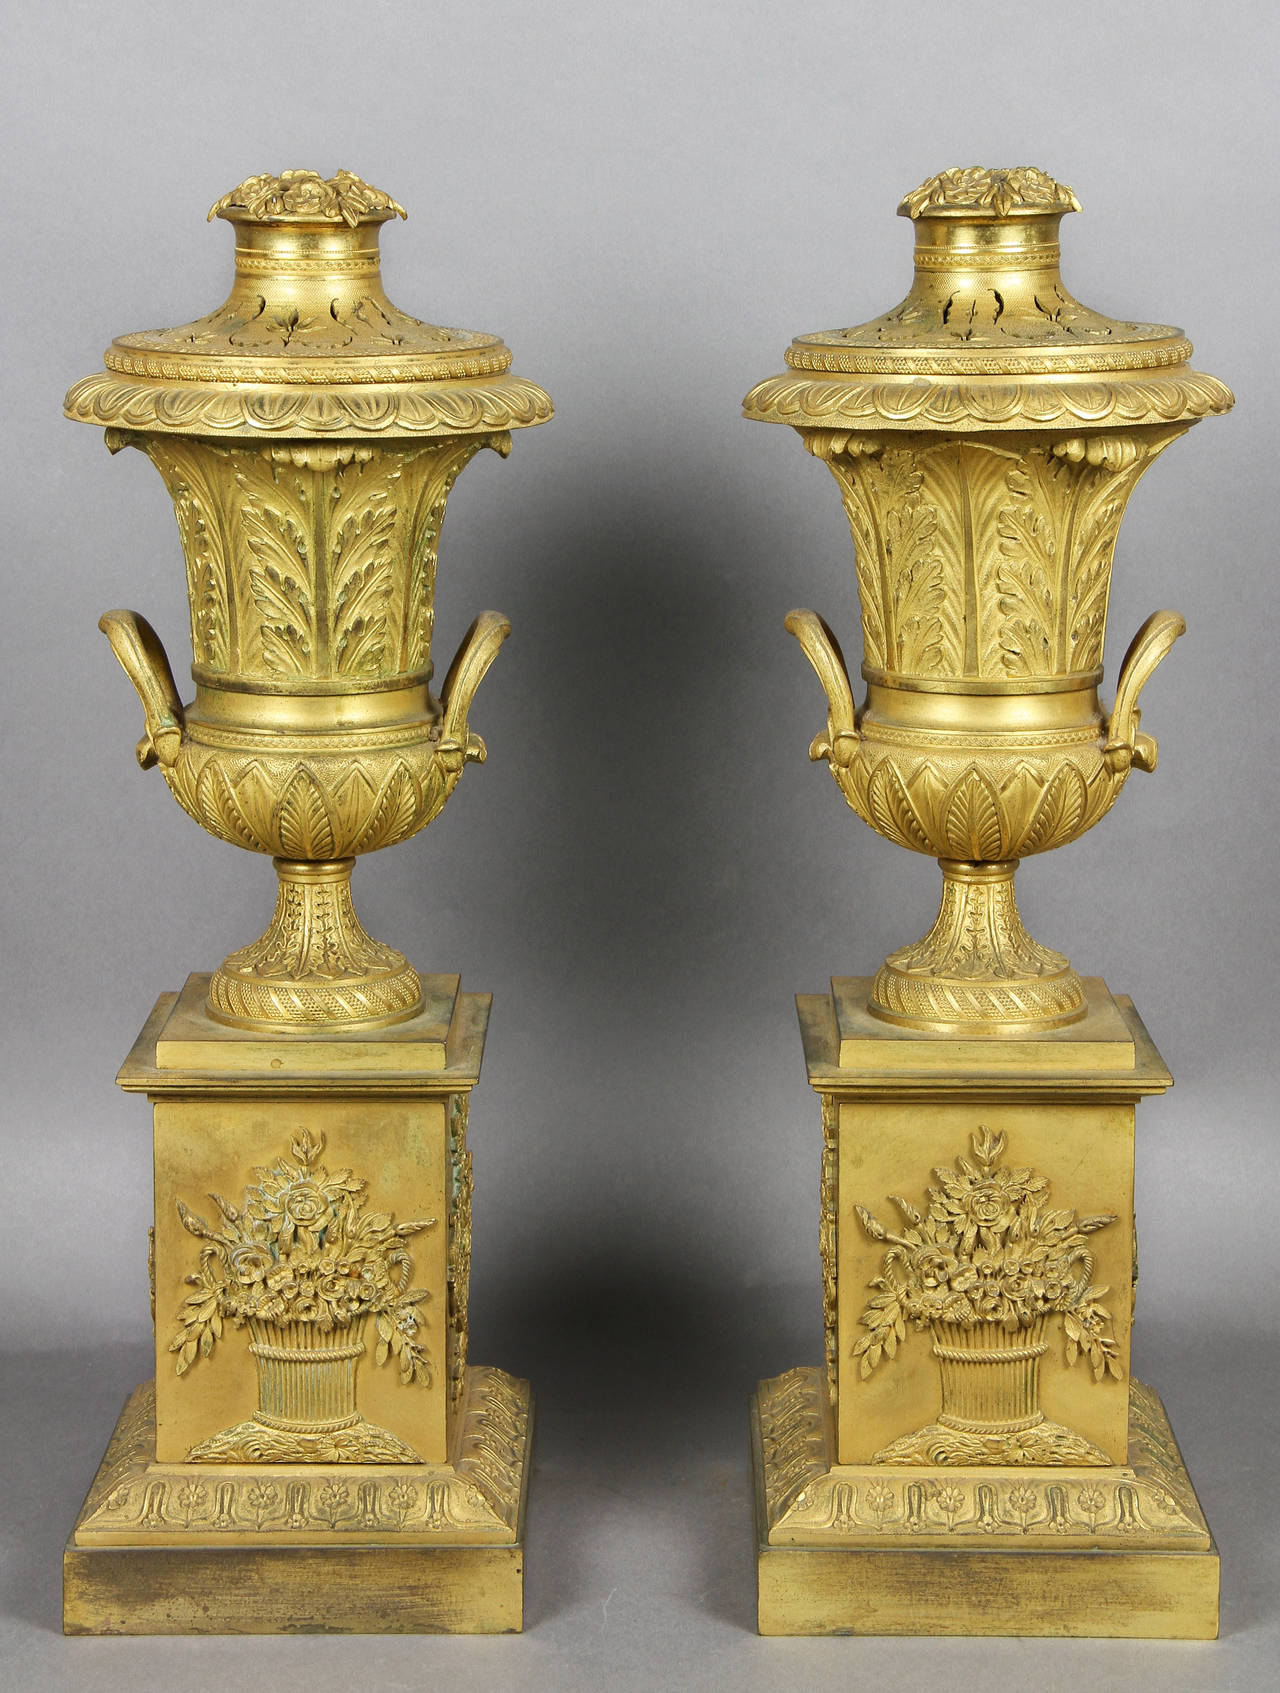 Each with a flower and leaf finial and pierced cover, the whole reversible to expose a candleholder over a campagna form two handled urn decorated with leaf tips and acanthus, the square form base with basket of flowers cast decoration.